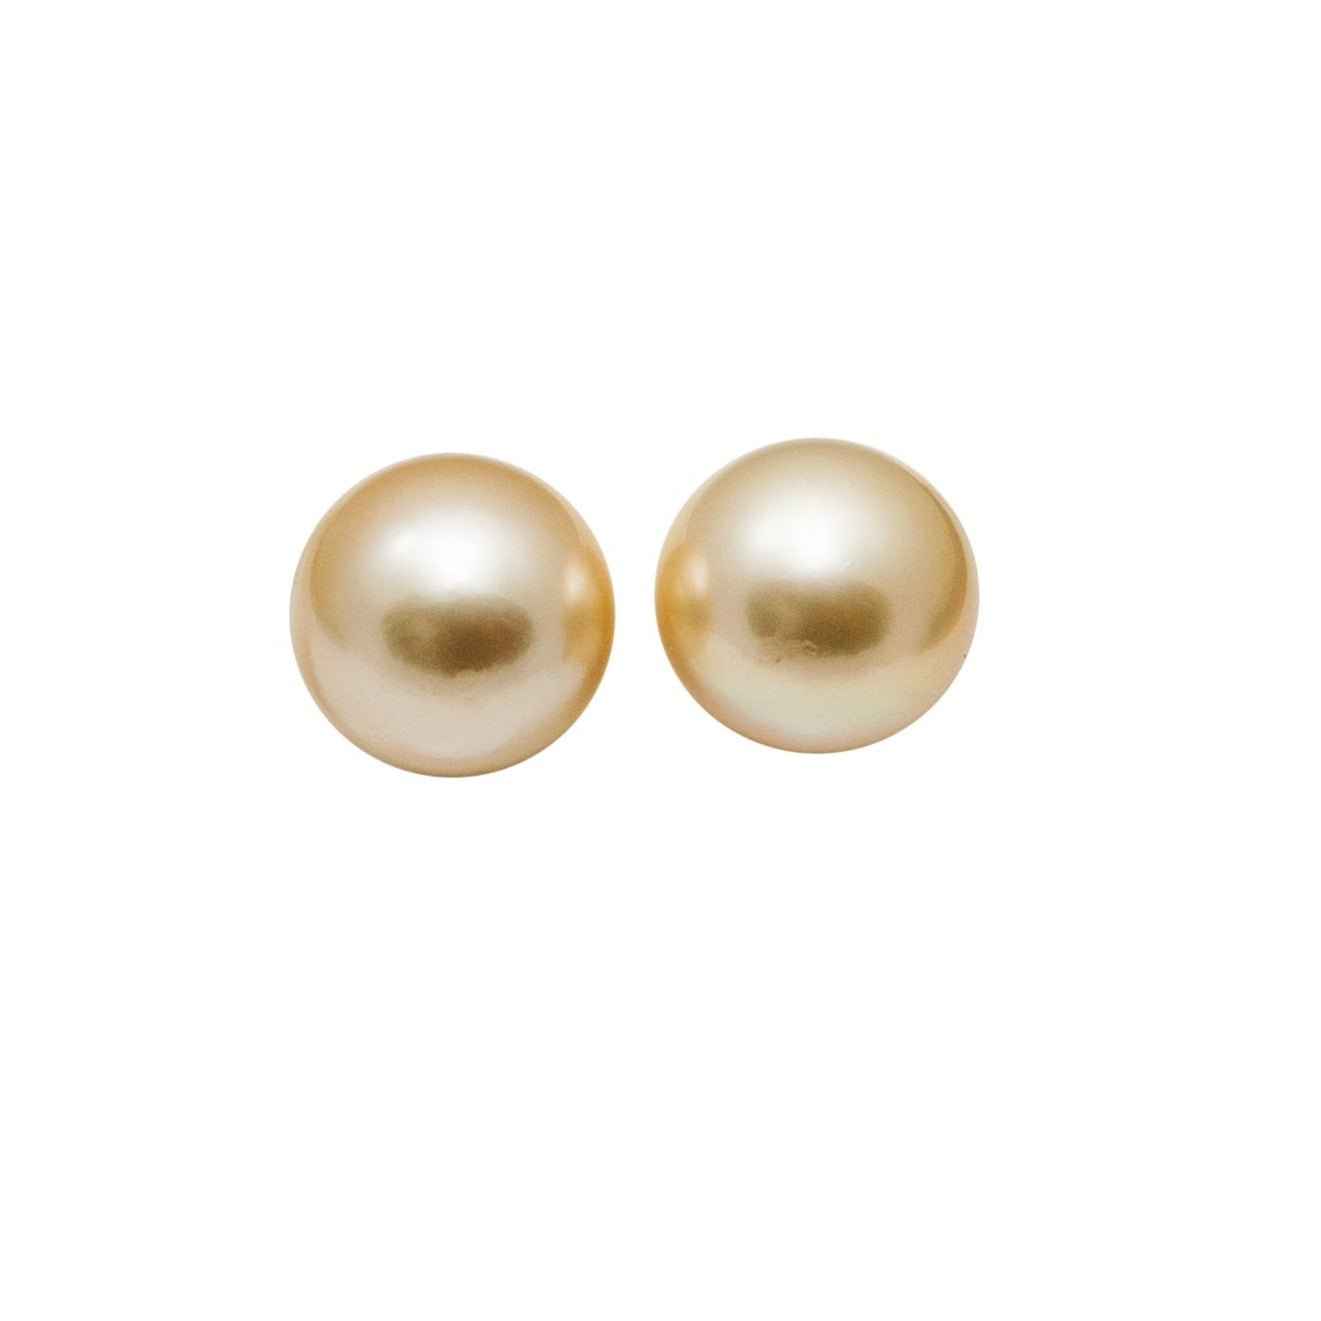 Enchanting cultured, golden South Sea pearls, 11mm in size, captivate the eyes with their gleaming luster. Skillfully cradled in 14k yellow gold cups, they are comfortably secured with a precision screw back system.